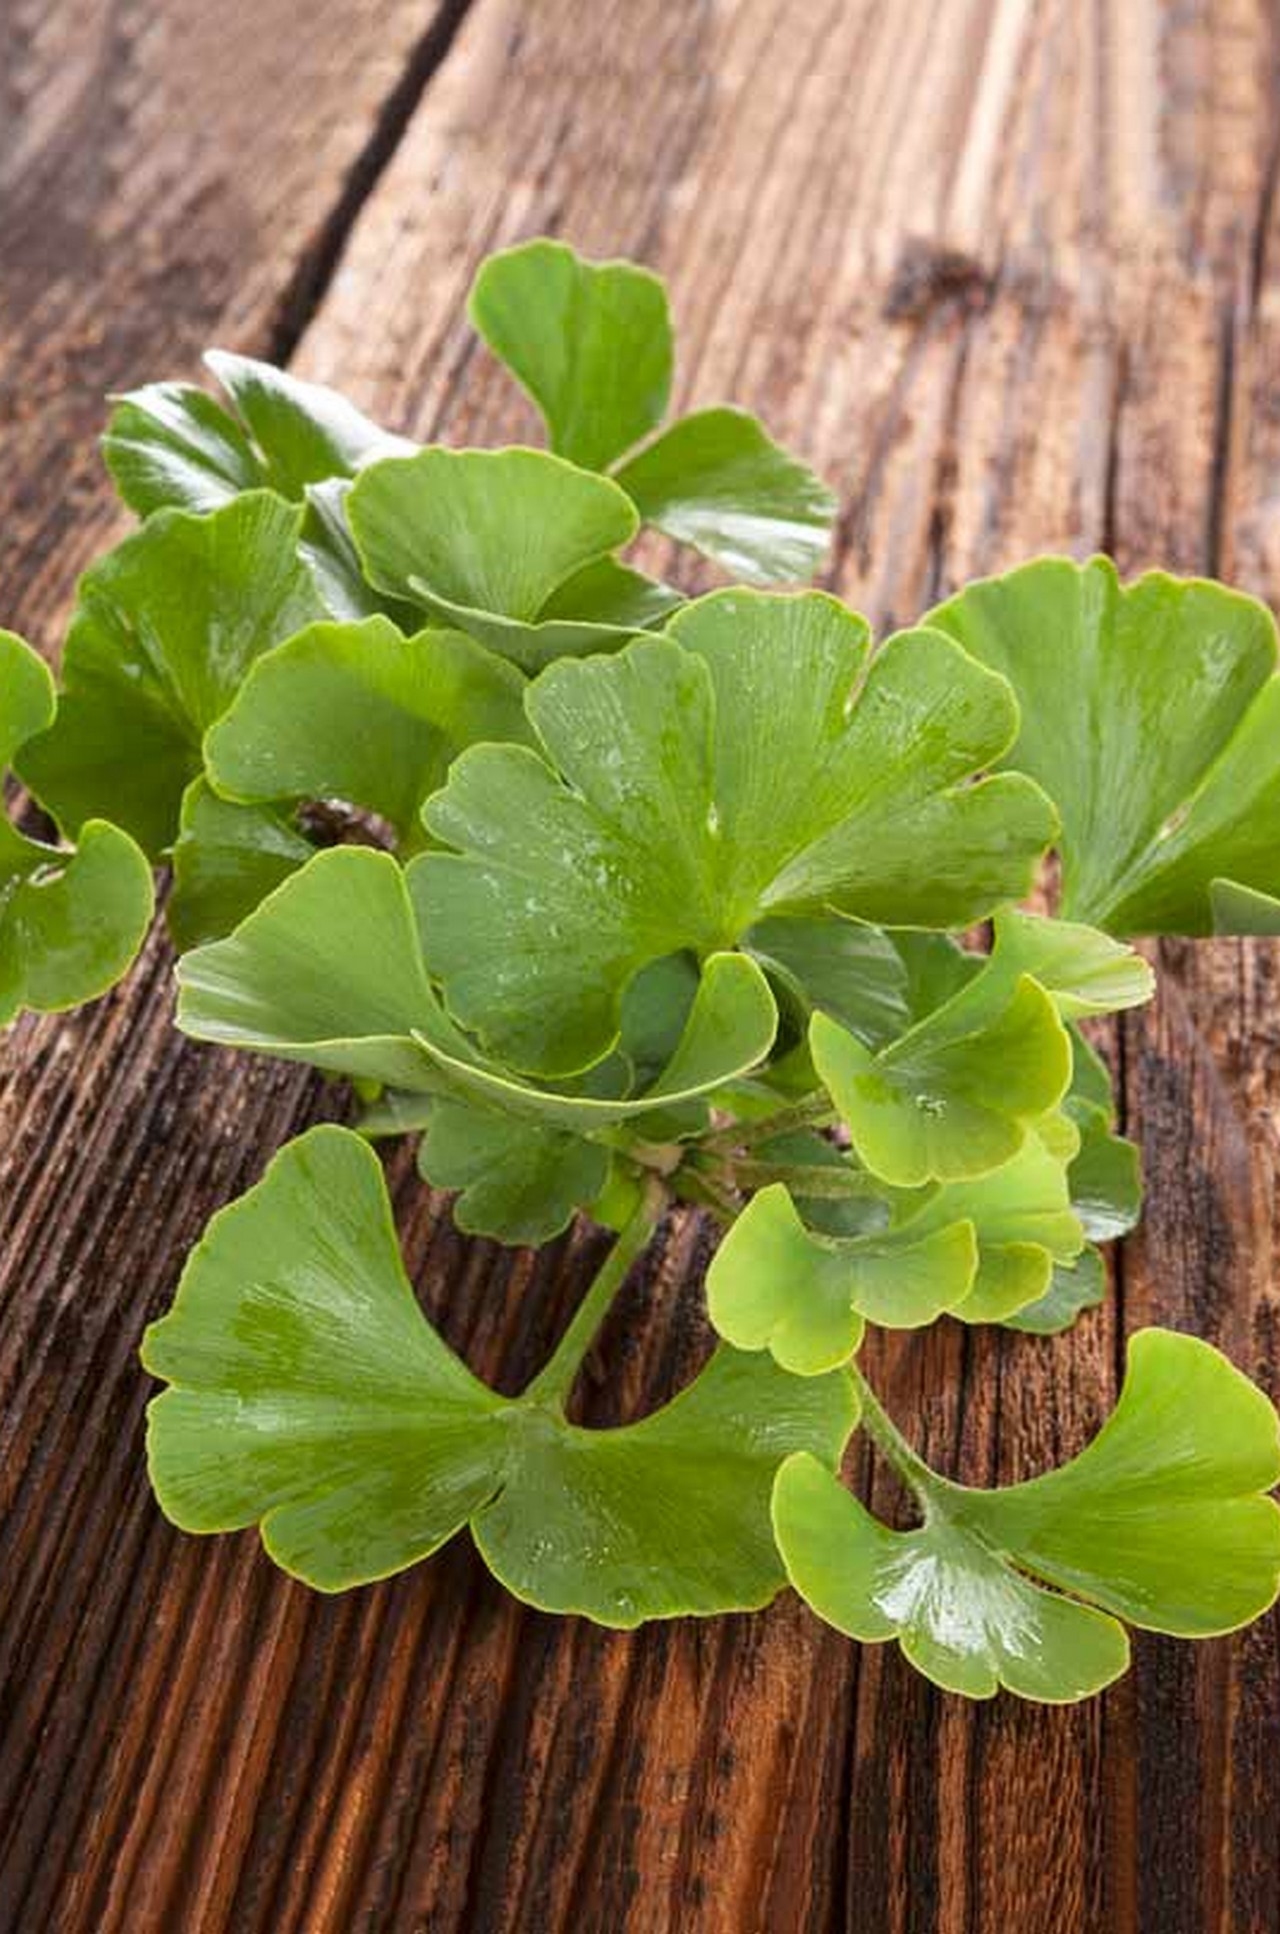  14 Ginkgo Biloba Benefits, Dosage, And Side Effects